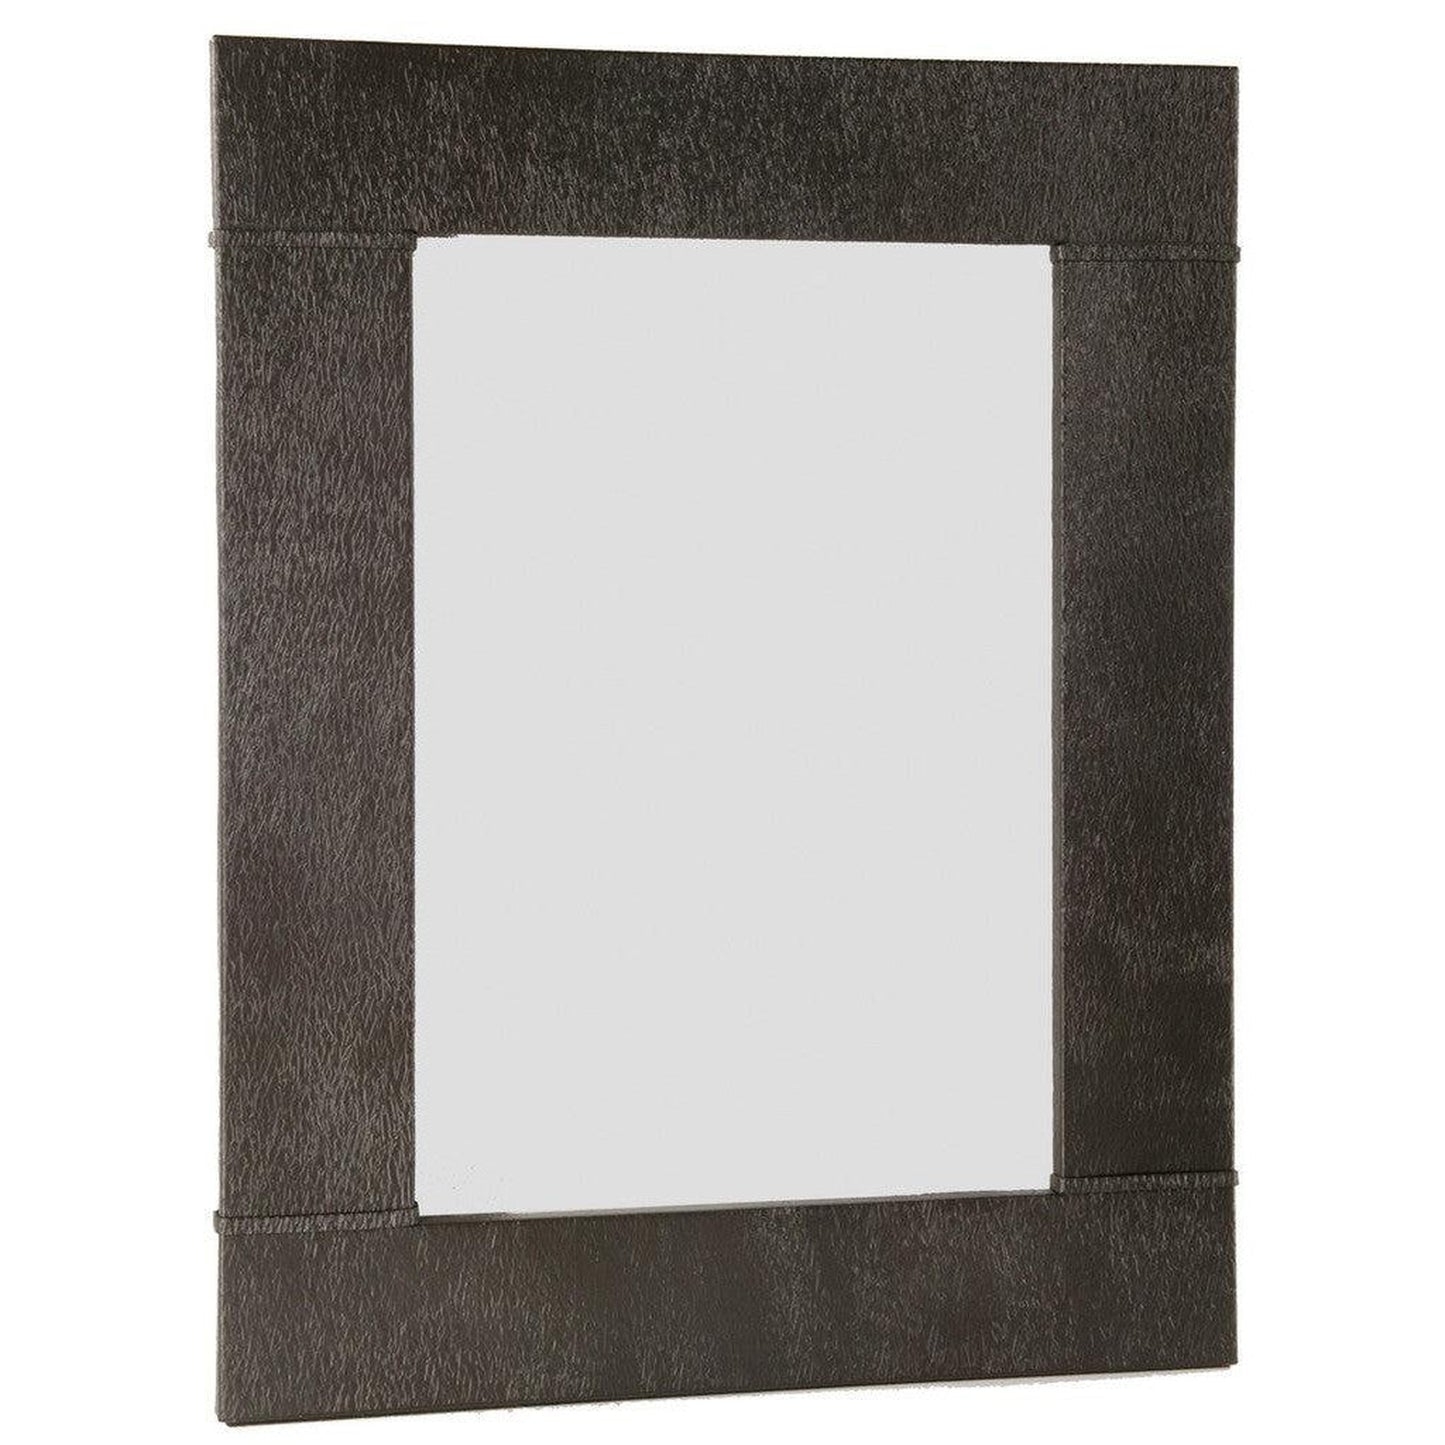 Stone County Ironworks Cedarvale 37" x 45" Large Natural Black Iron Wall Mirror